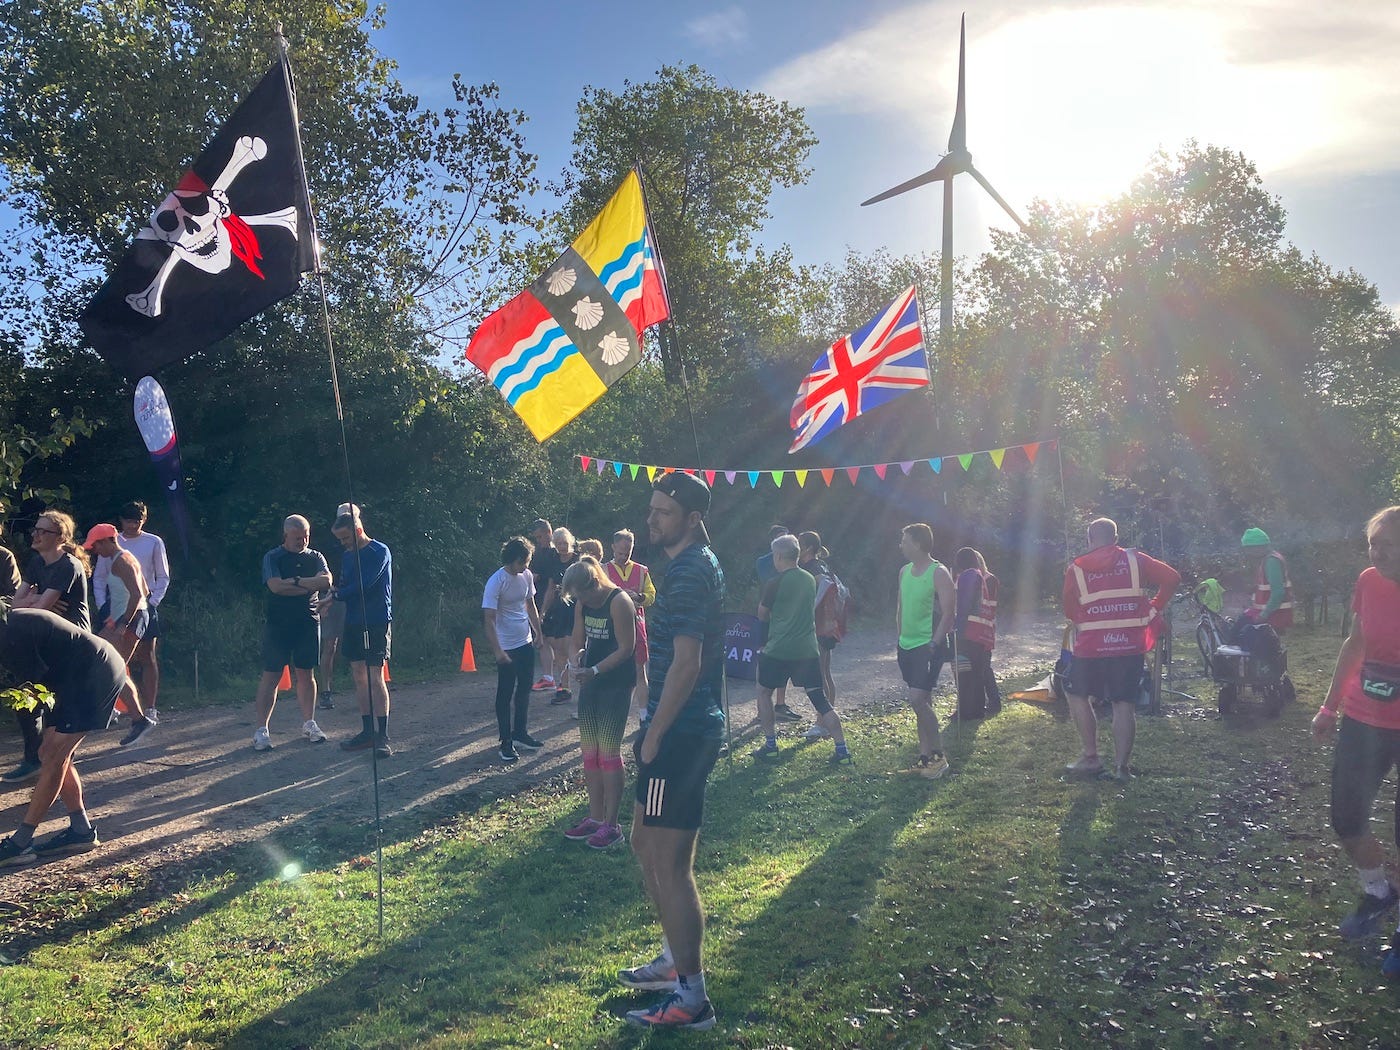 Several colourful flags and bunting suspended at the start